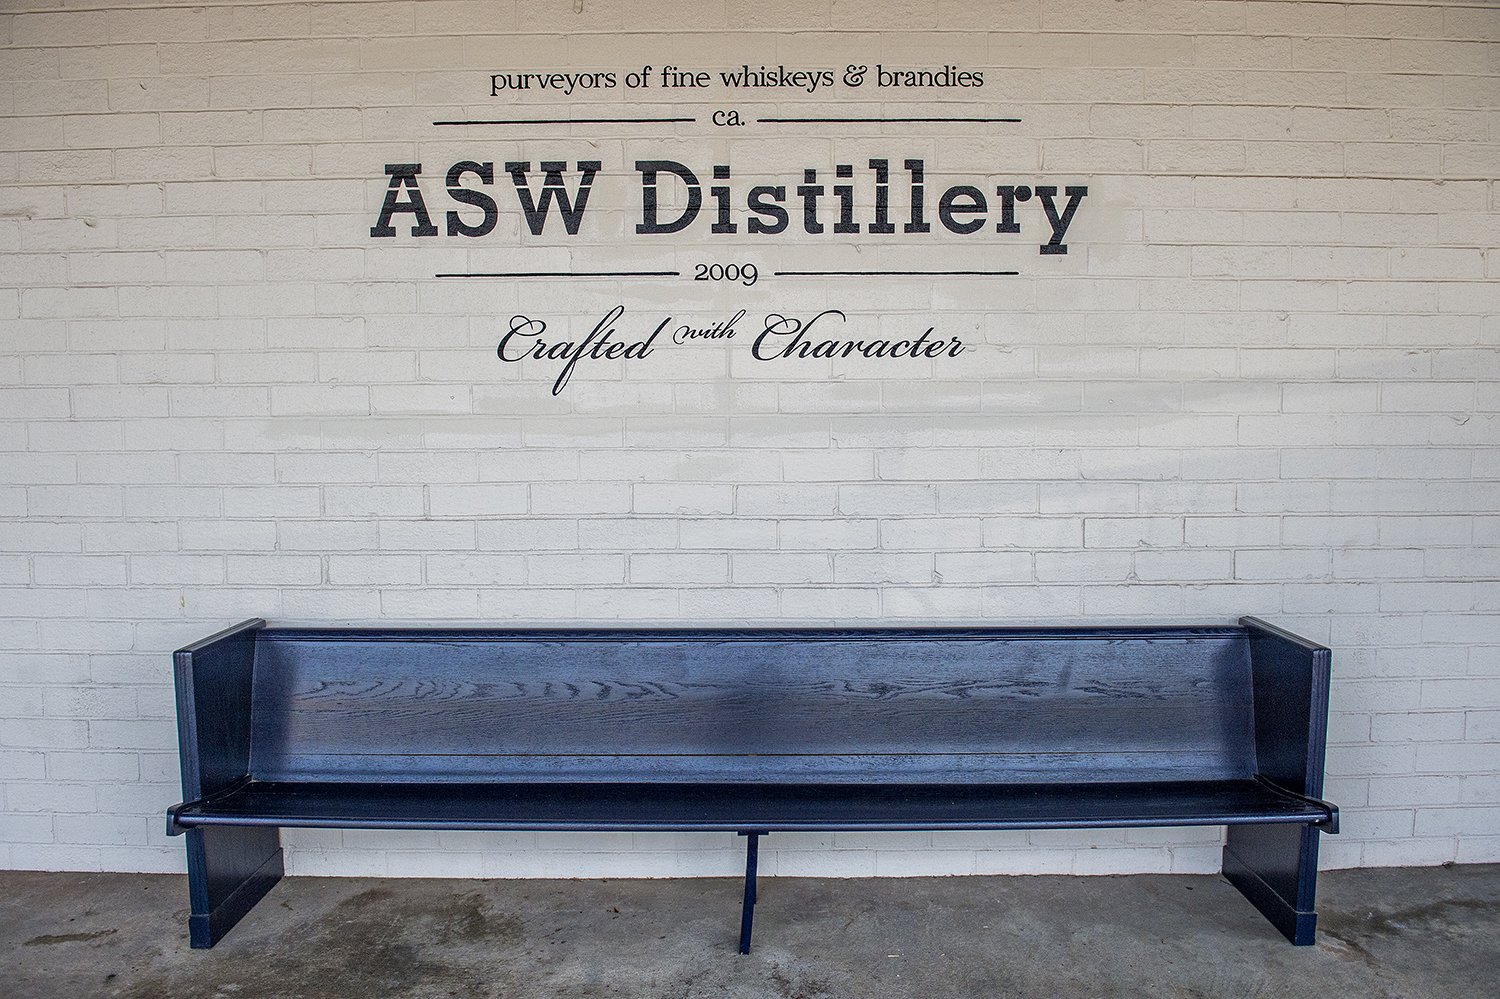 Signage at ASW Distillery in Buckhead